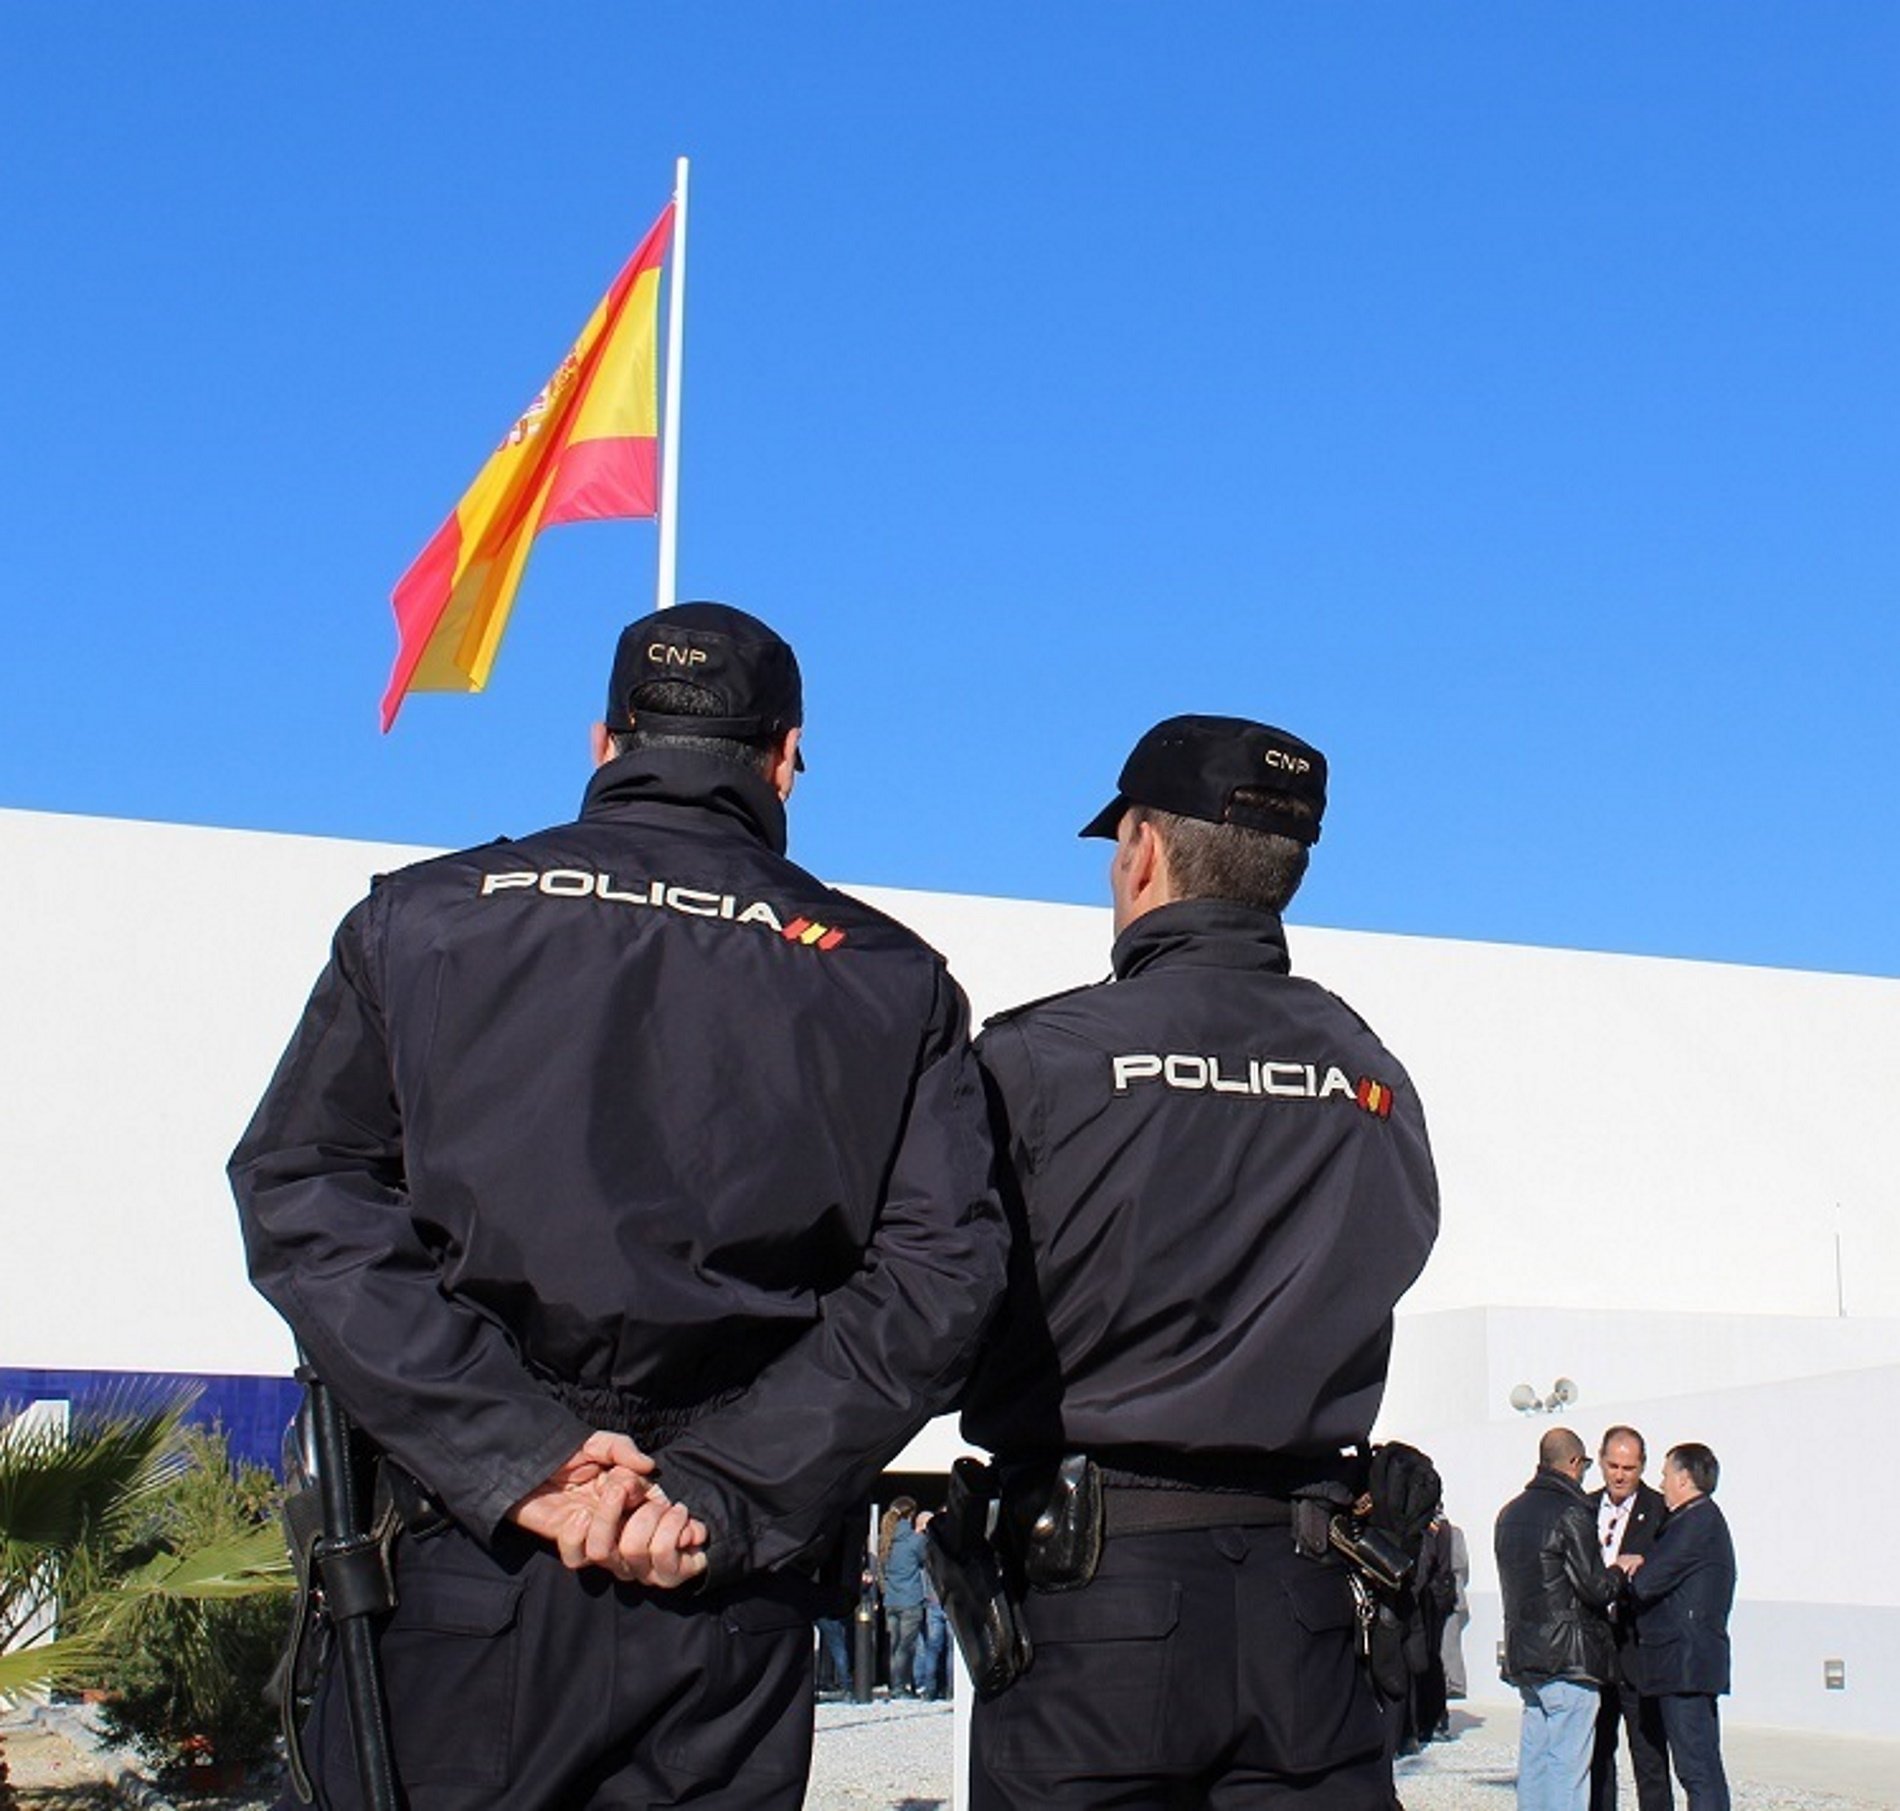 The image of Yolanda Díaz smiling at Puigdemont's side annoys Spanish police unions